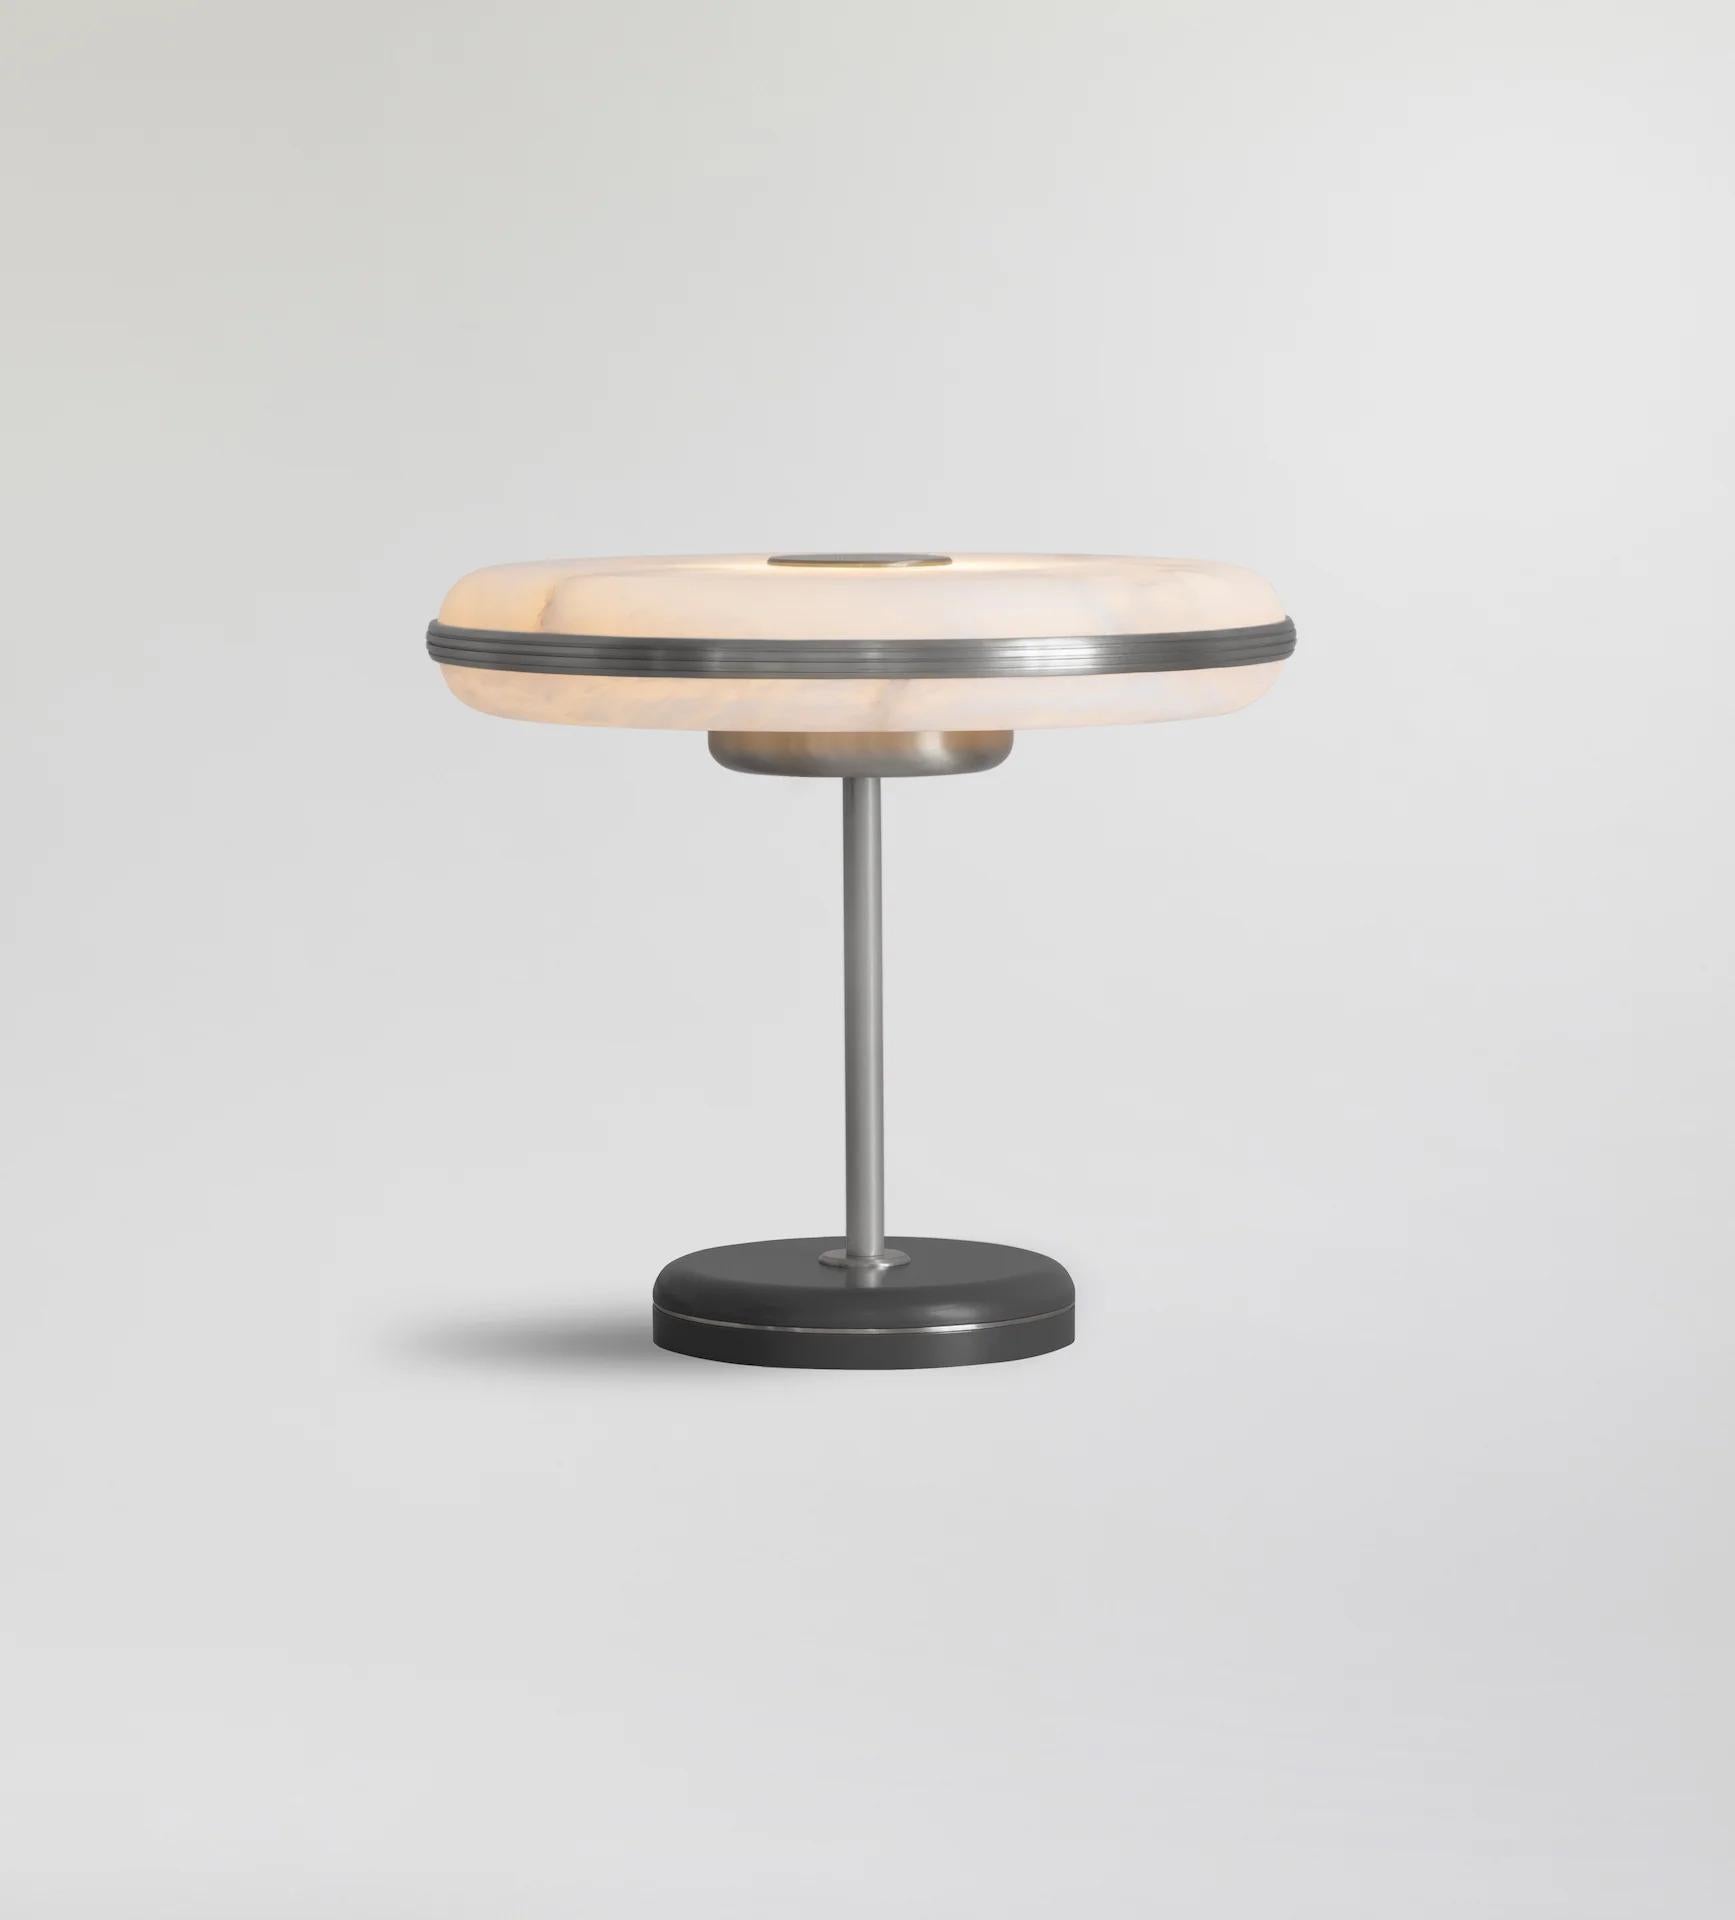 Beran Satin Nickel Large Table Lamp by Bert Frank
Dimensions: Ø 36 x H 32 cm.
Materials: Satin nickel and alabaster.
Base finish: Satin black.

Available in two different sizes. Available in different finishes and materials. Please contact us. 

The